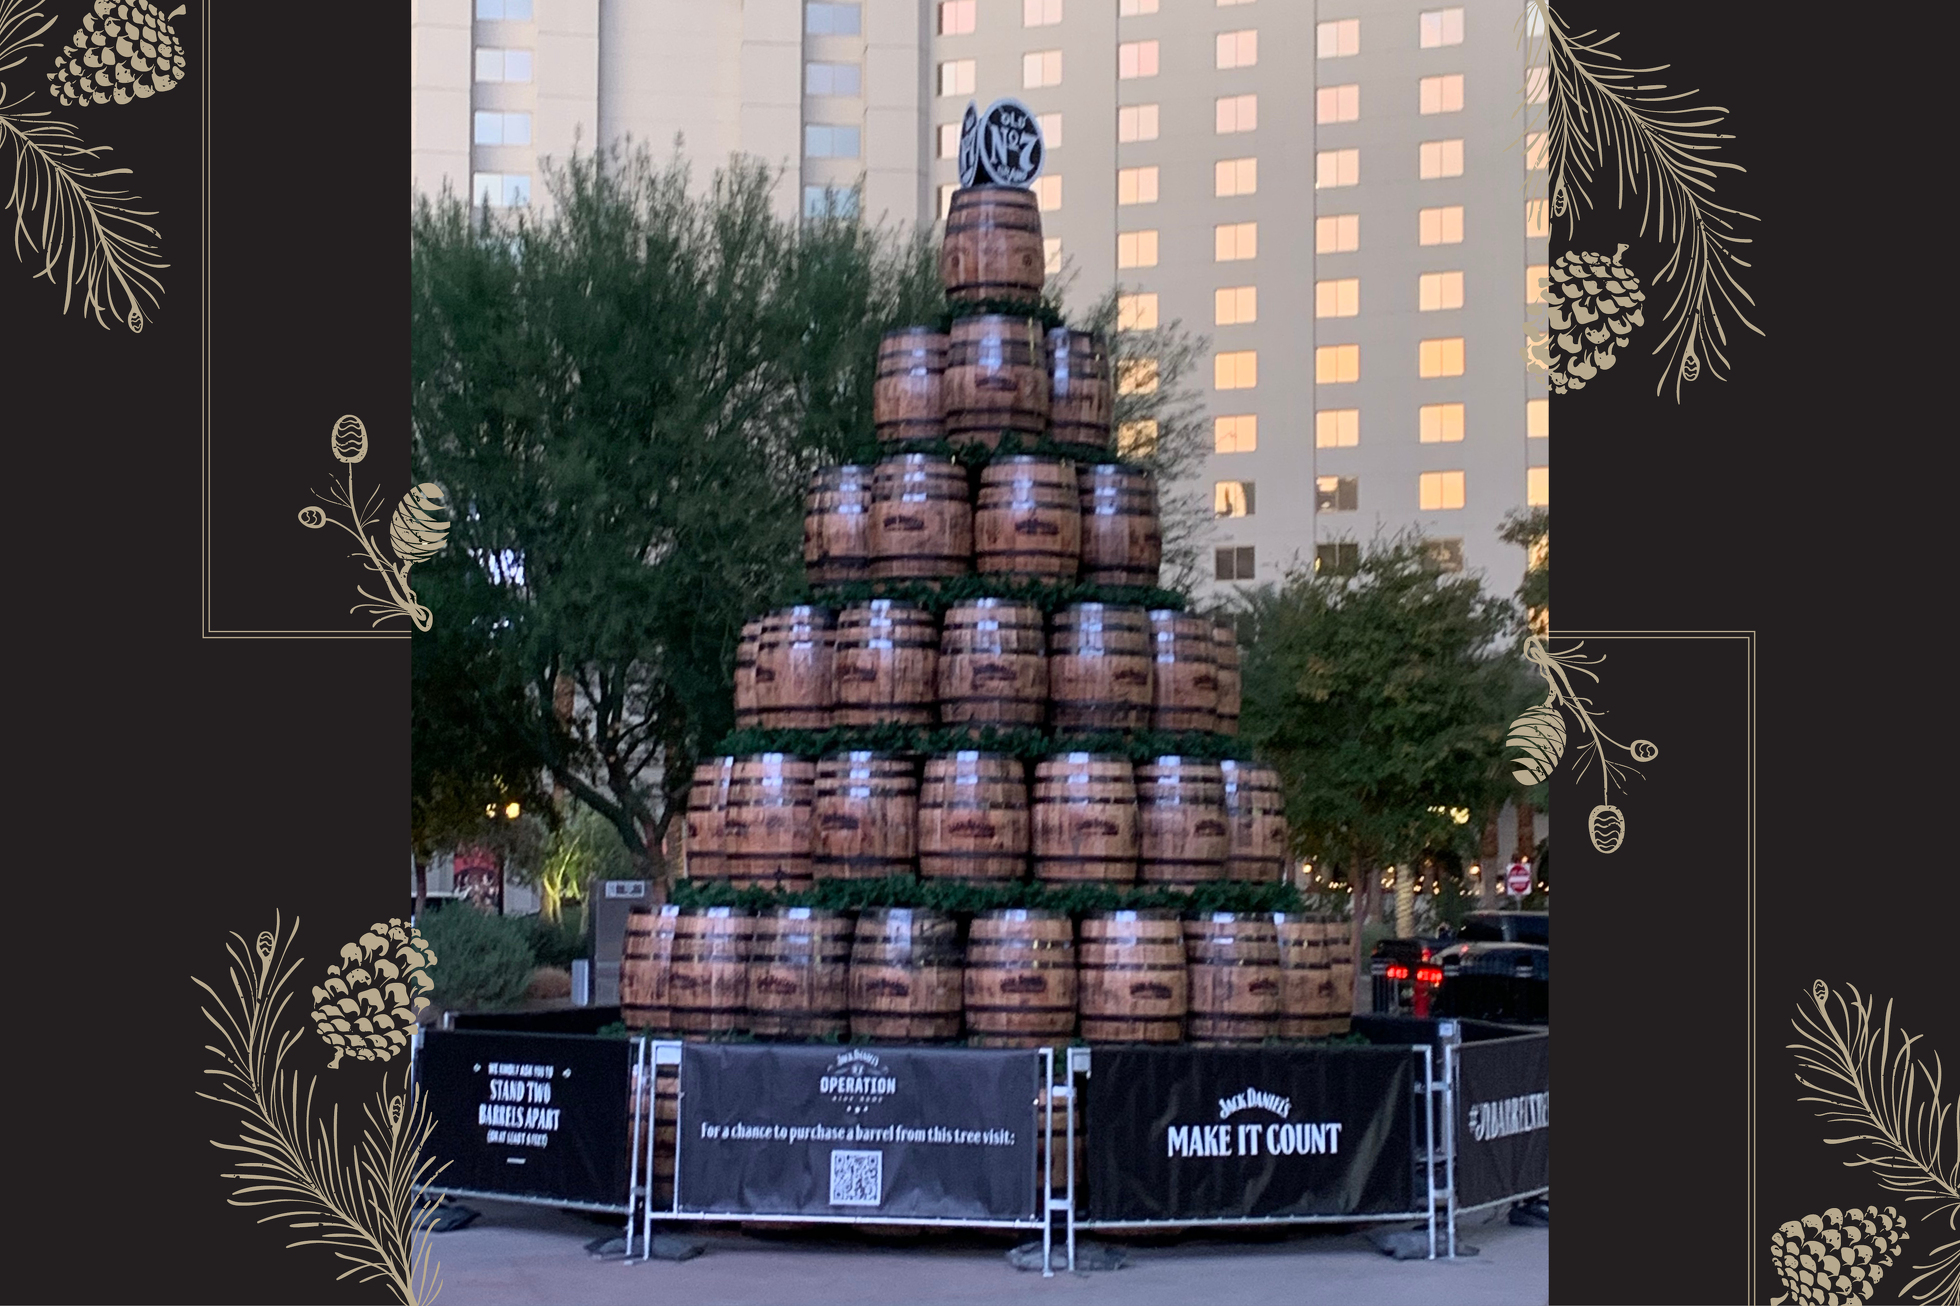 Top Barrel of the Holiday Tree from Las Vegas